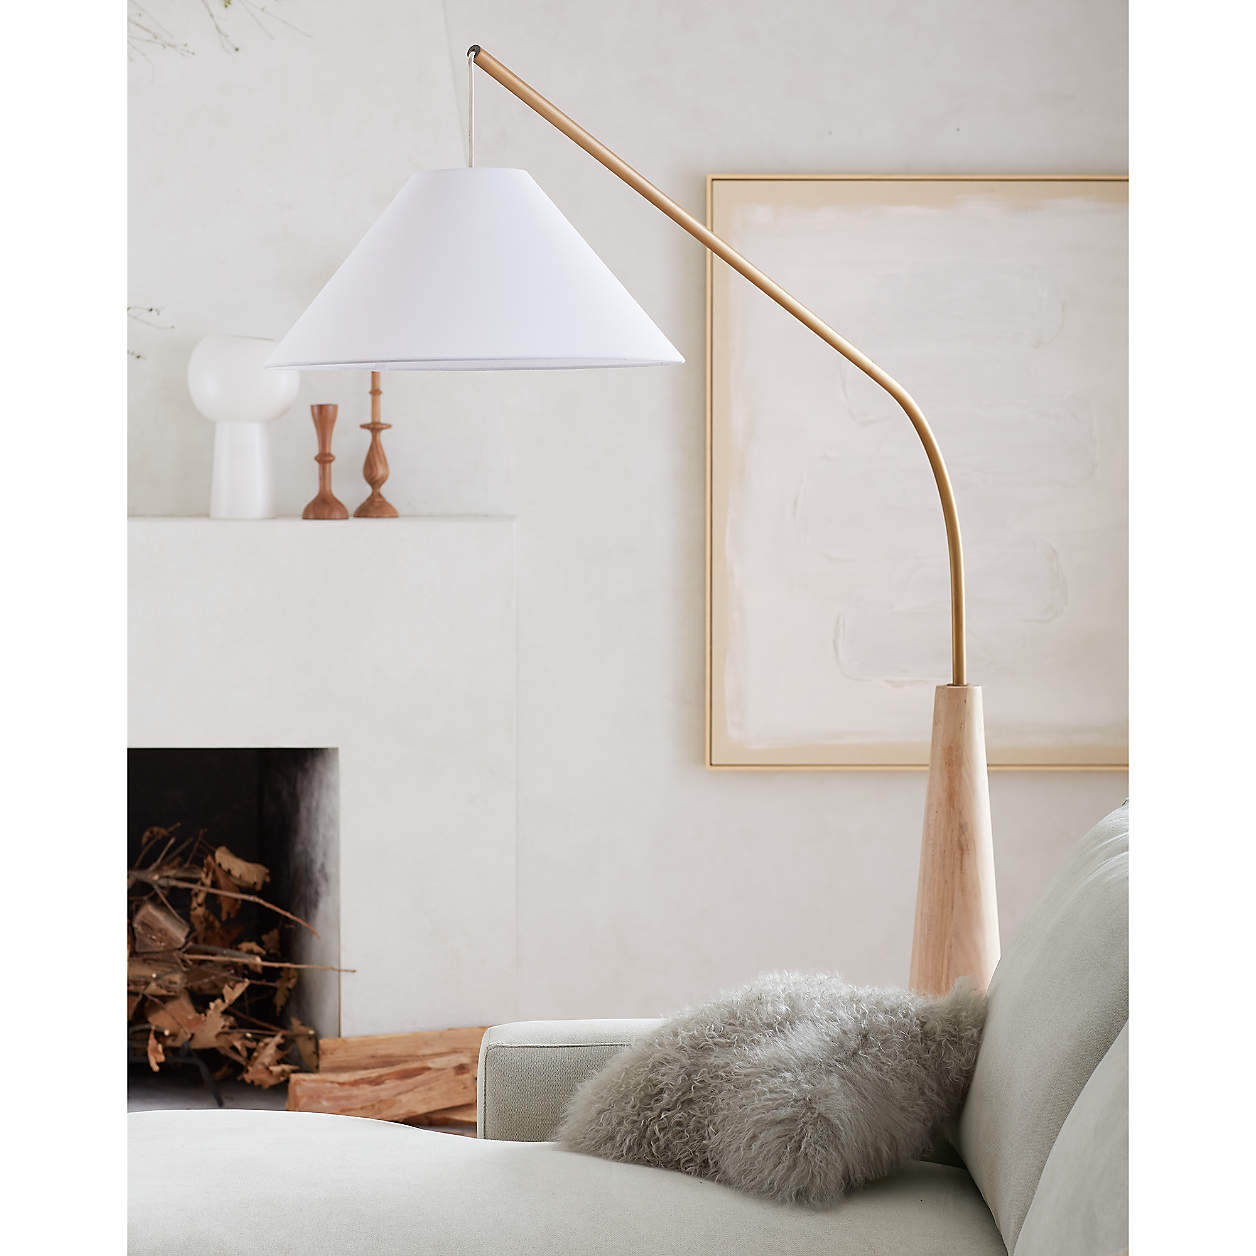 Gibson Wood Hanging Arc Floor Lamp with White Shade - Image 1